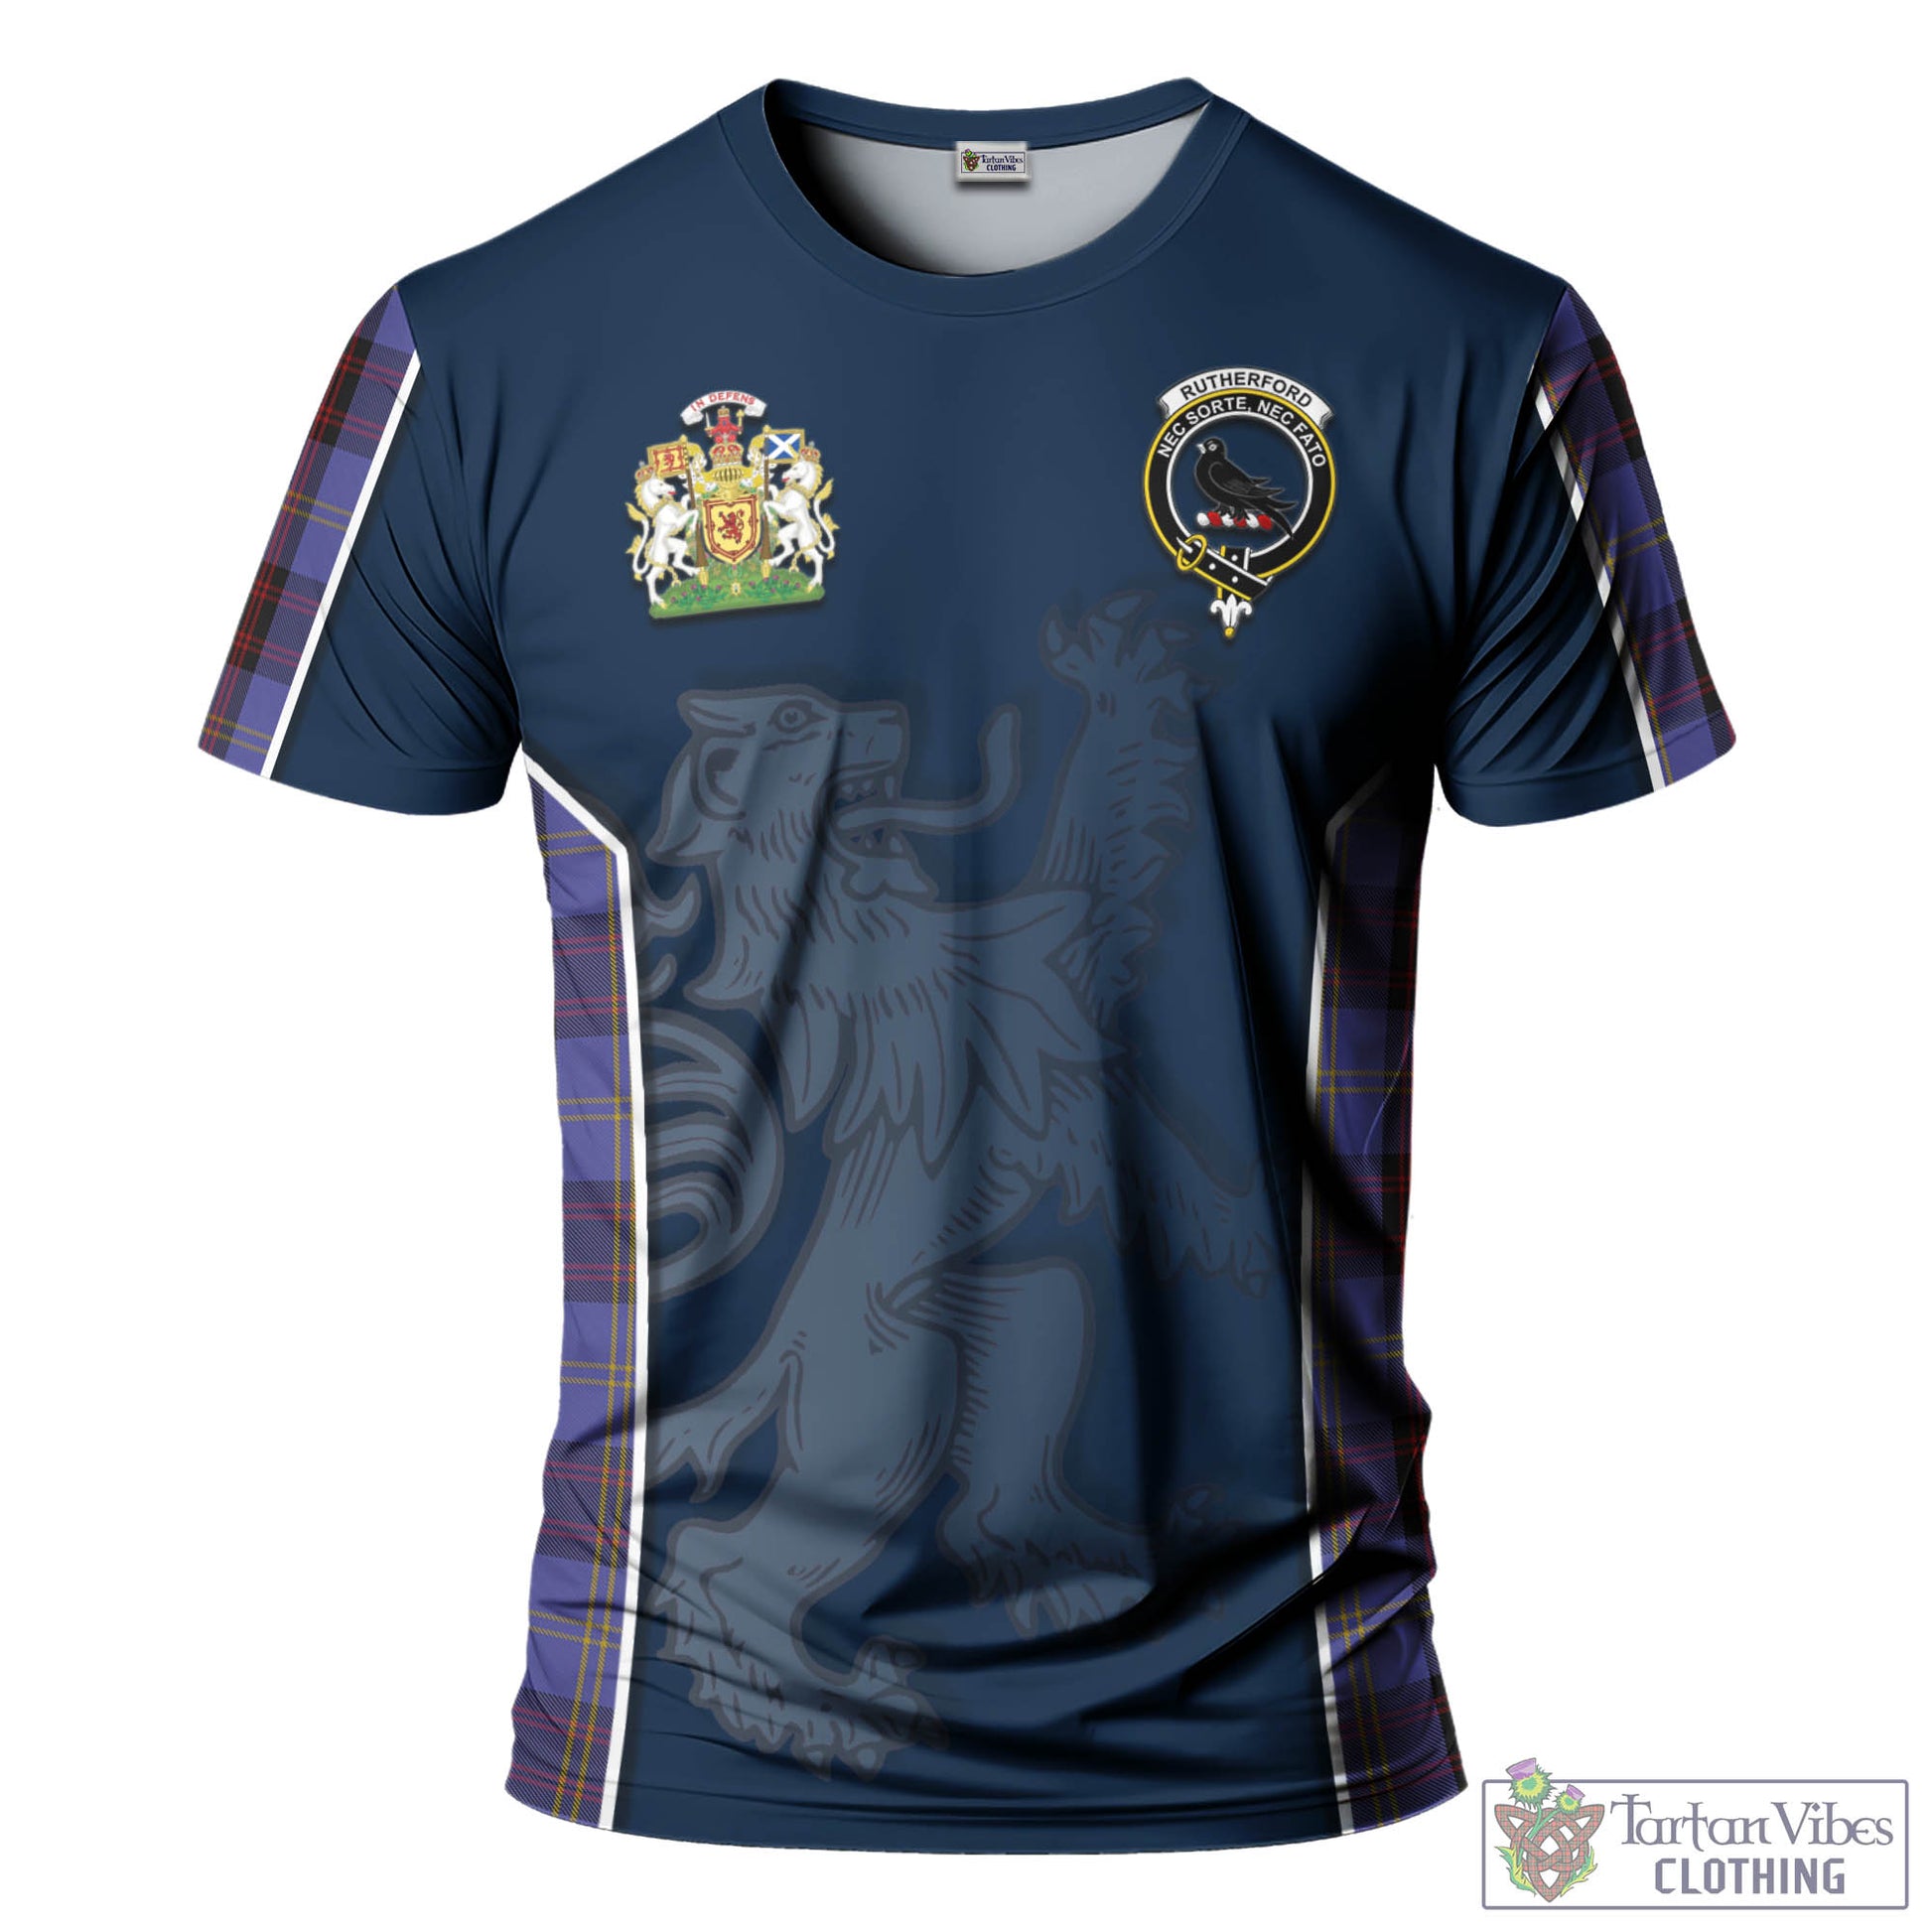 Tartan Vibes Clothing Rutherford Tartan T-Shirt with Family Crest and Lion Rampant Vibes Sport Style